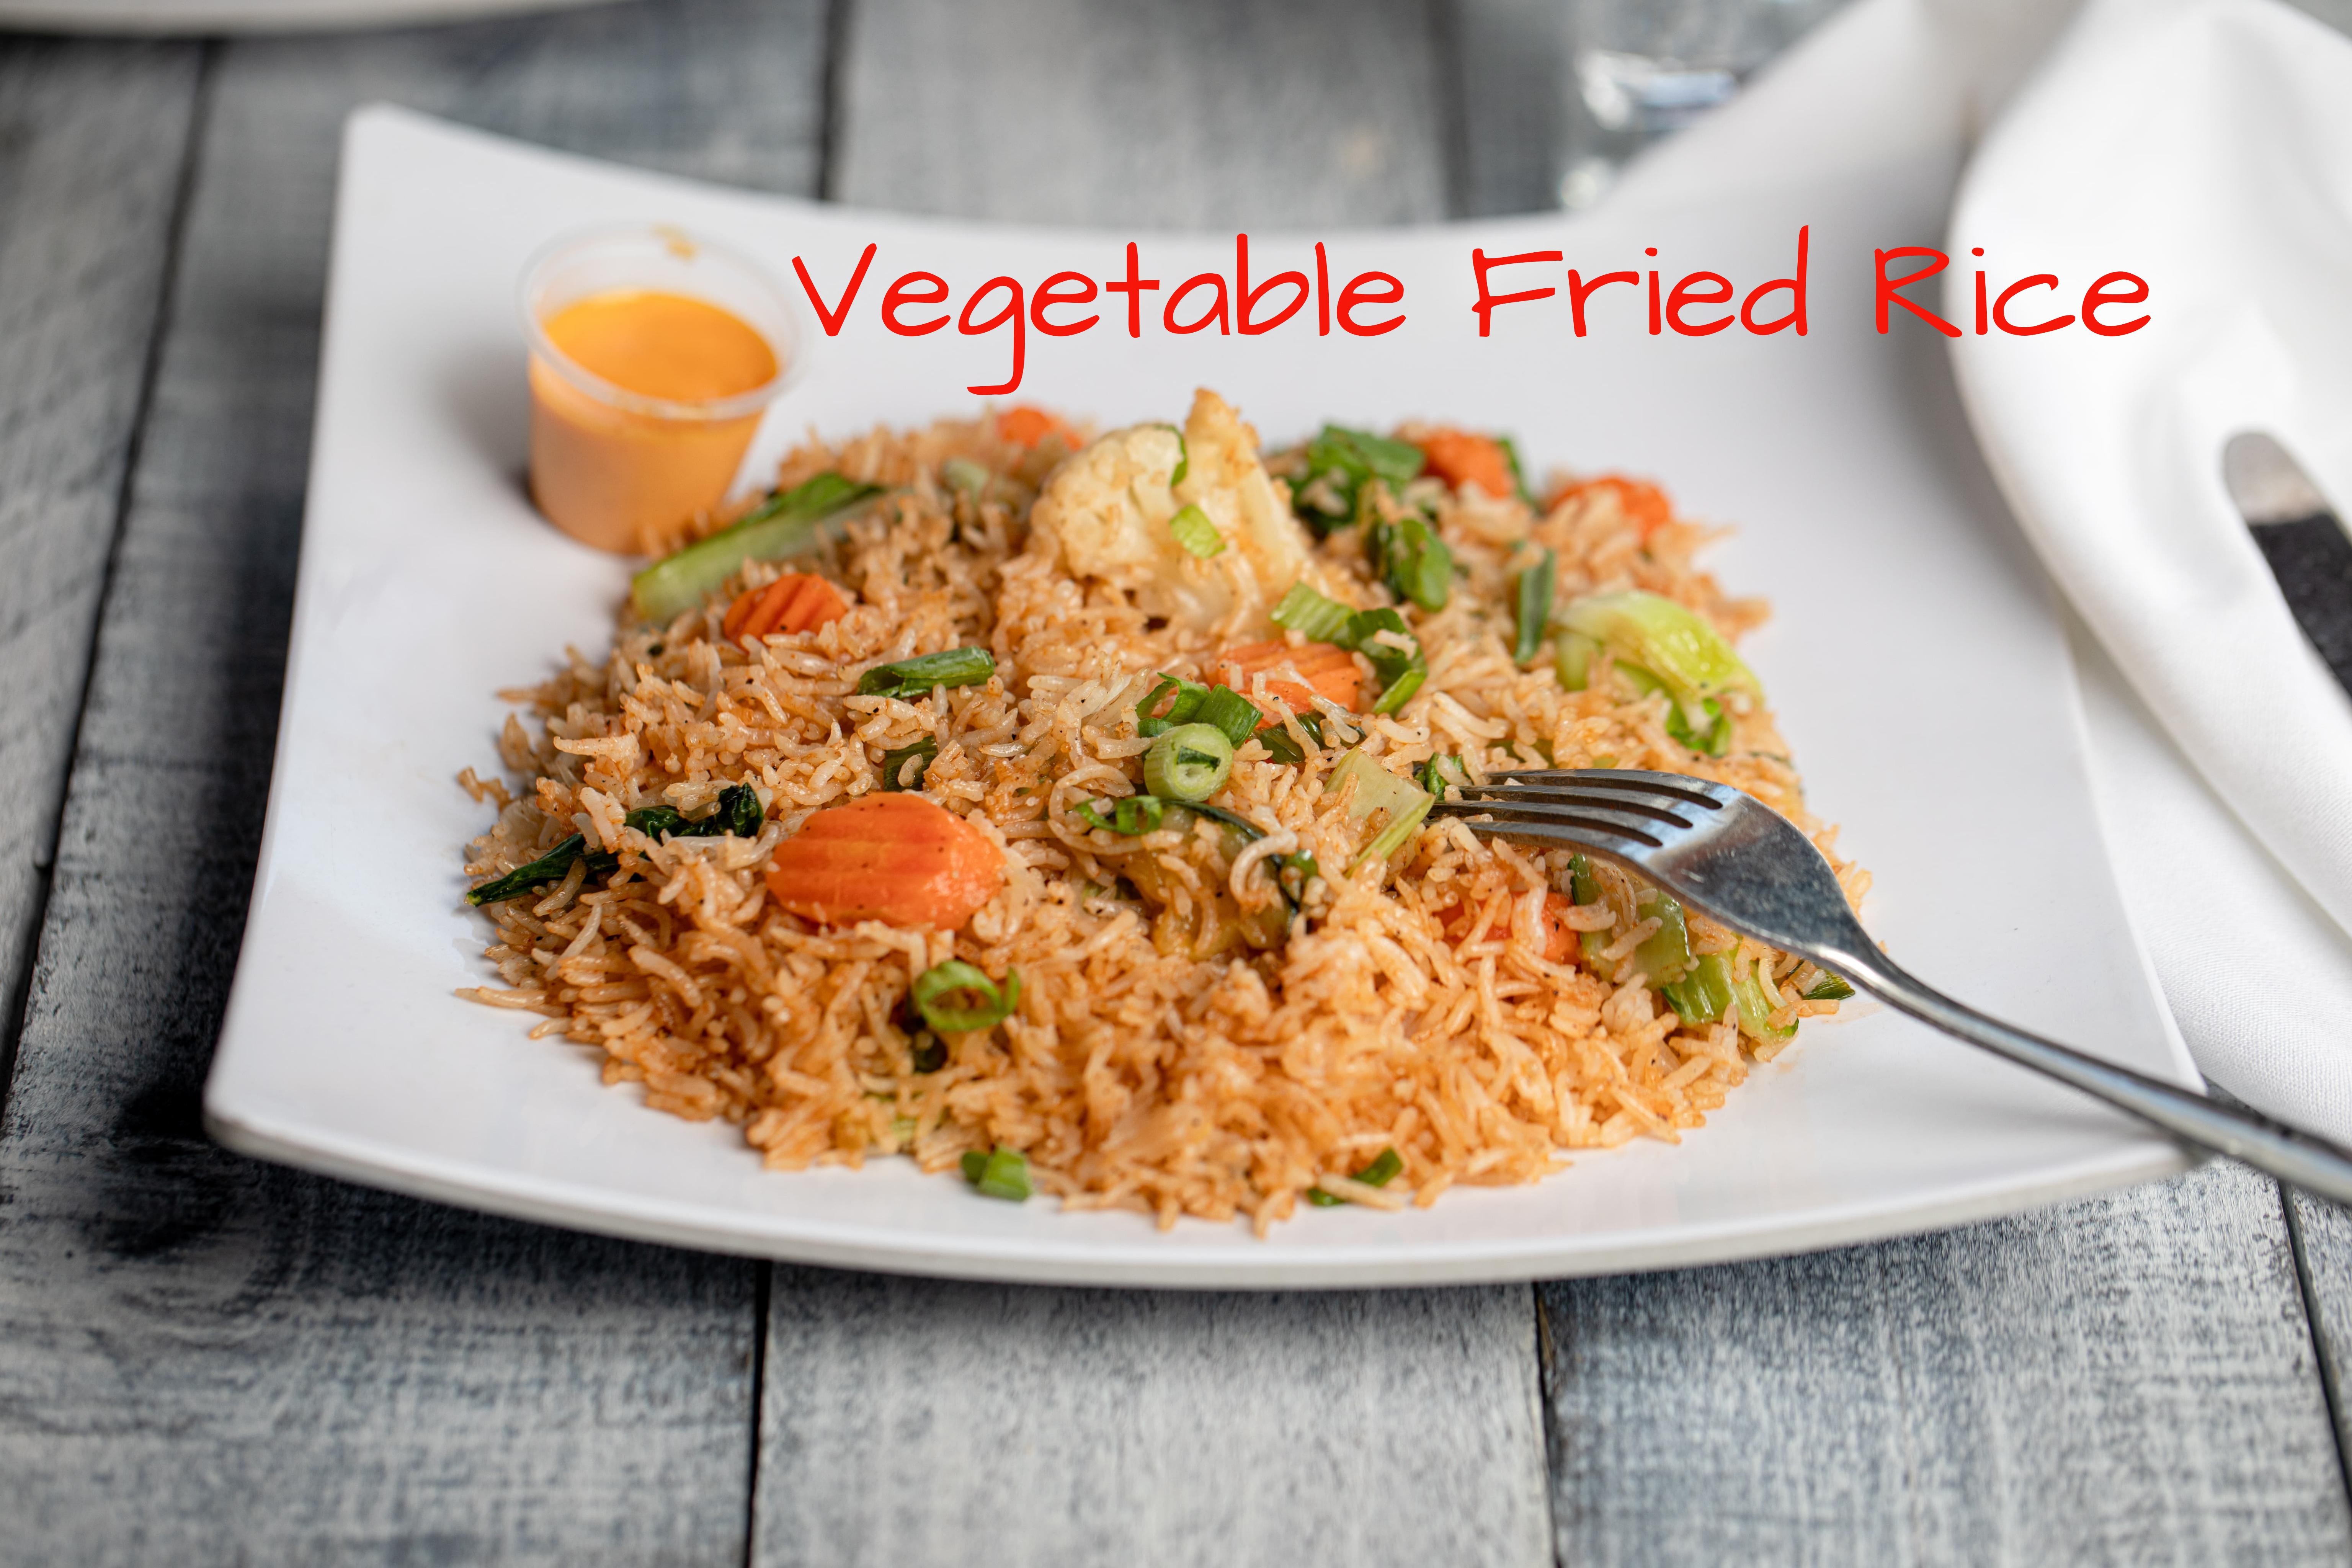 Mix Vegetable Fried Rice